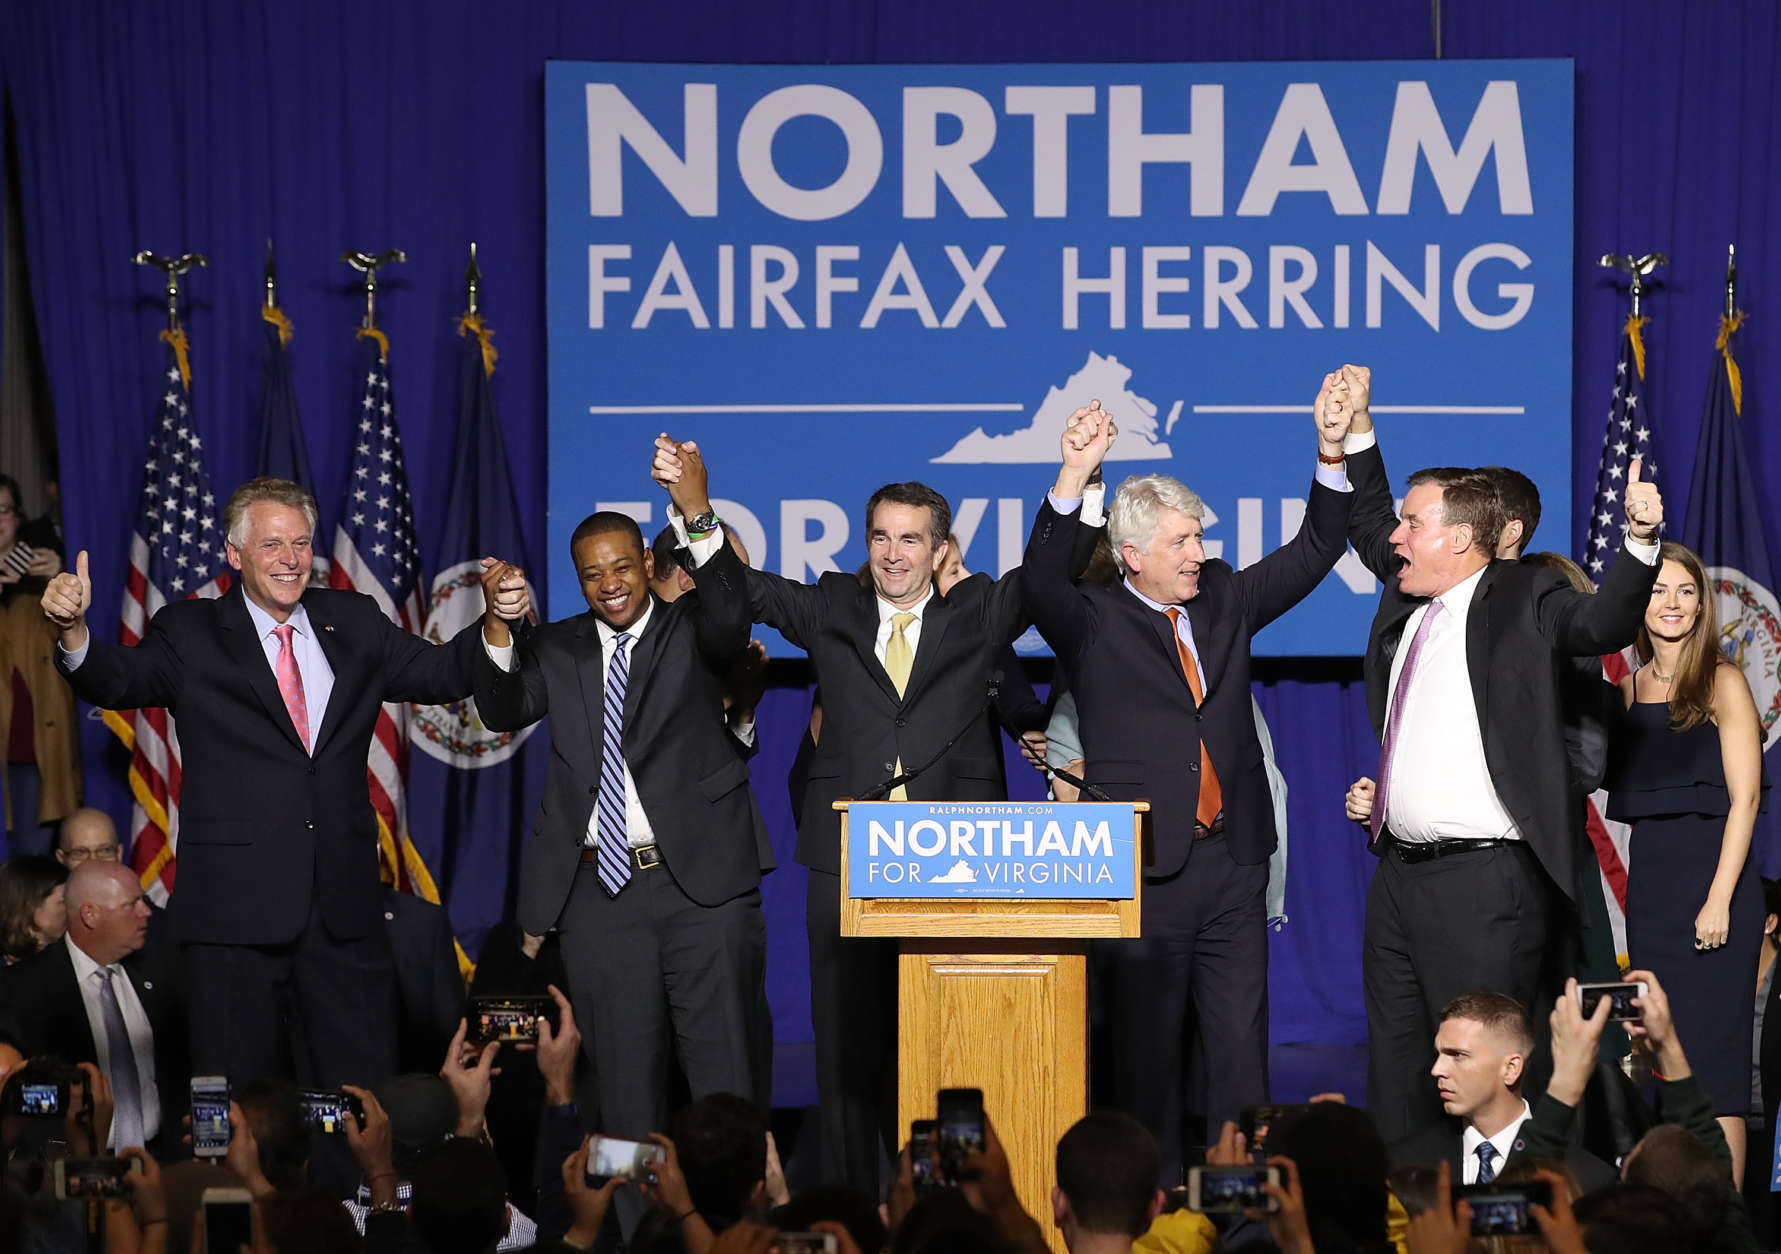 FAIRFAX, VA - NOVEMBER 07:  Gov.-elect Ralph Northam (C) links arms with (L-R) current Gov. Terry McAuliffe, Lt. Gov.-elect Justin Fairfax, Attorney General-elect Mark Herring, and U.S. Sen. Mark Warner (D-VA) at an election night rally November 7, 2017 in Fairfax, Virginia. Northam defeated Republican candidate Ed Gillespie.  (Photo by Win McNamee/Getty Images)